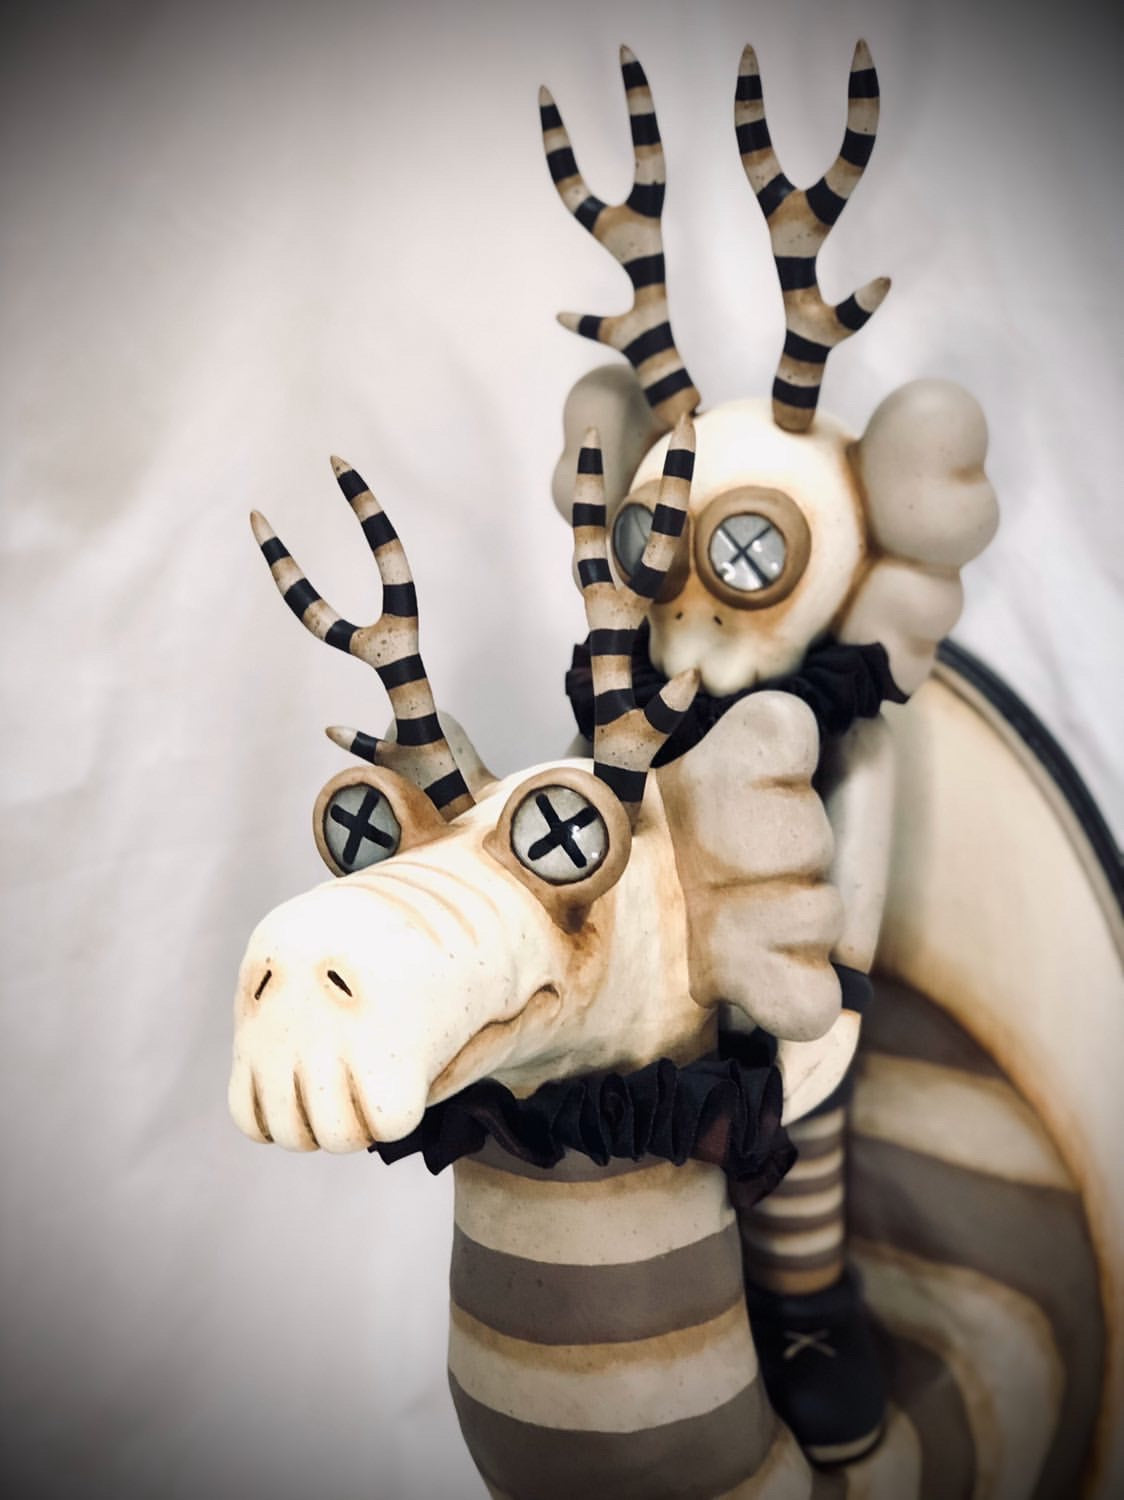 A custom show statue of a deer with horns on a circular object, striped antlers, and a cartoon eye.